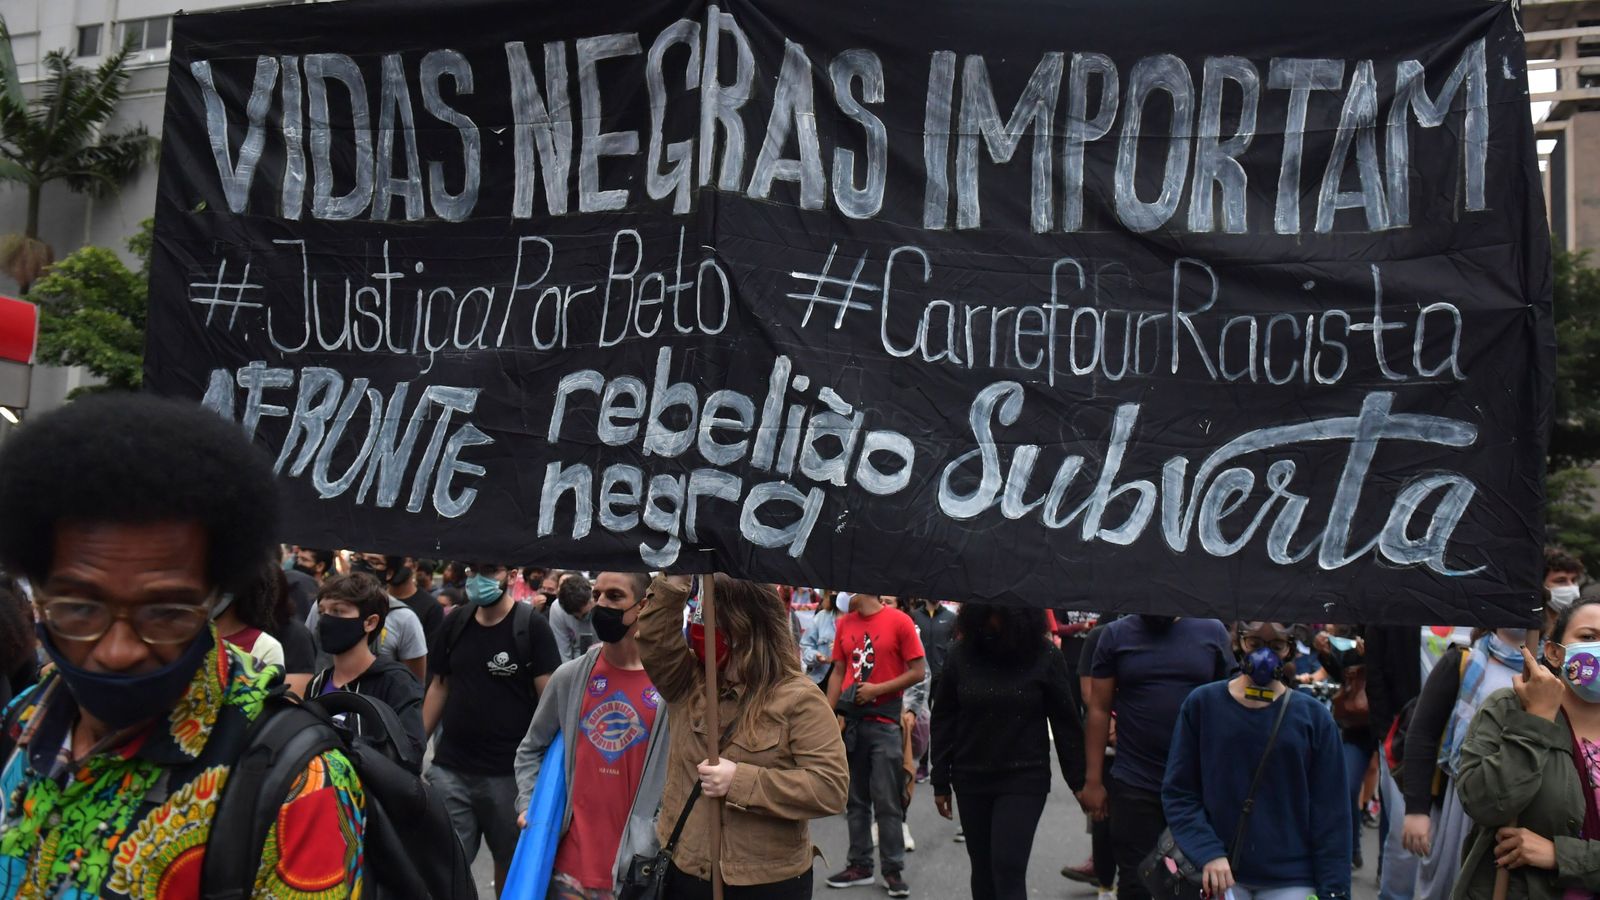 The influence of U.S. Black activism in Latin America